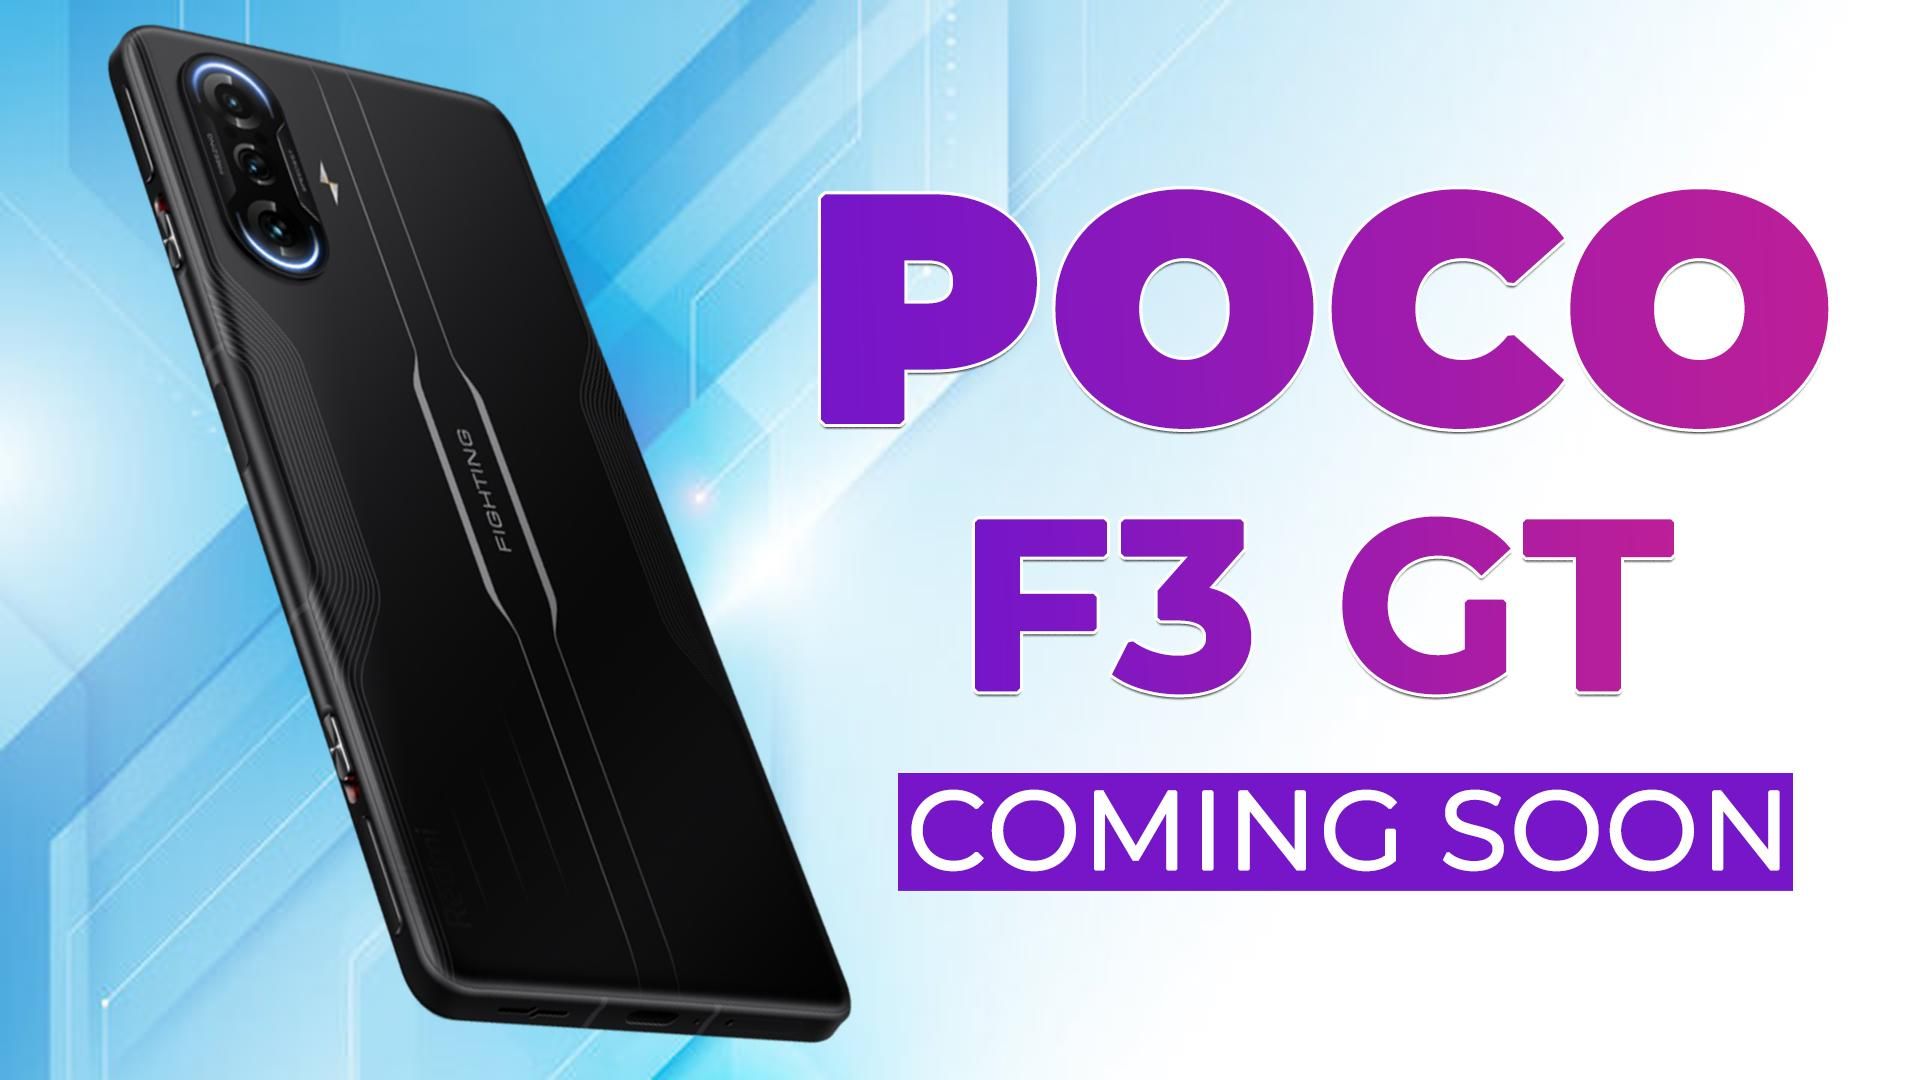 Poco F3 Gt All You Need To Know Price Specifications Launch Date Tech Reveal 5762